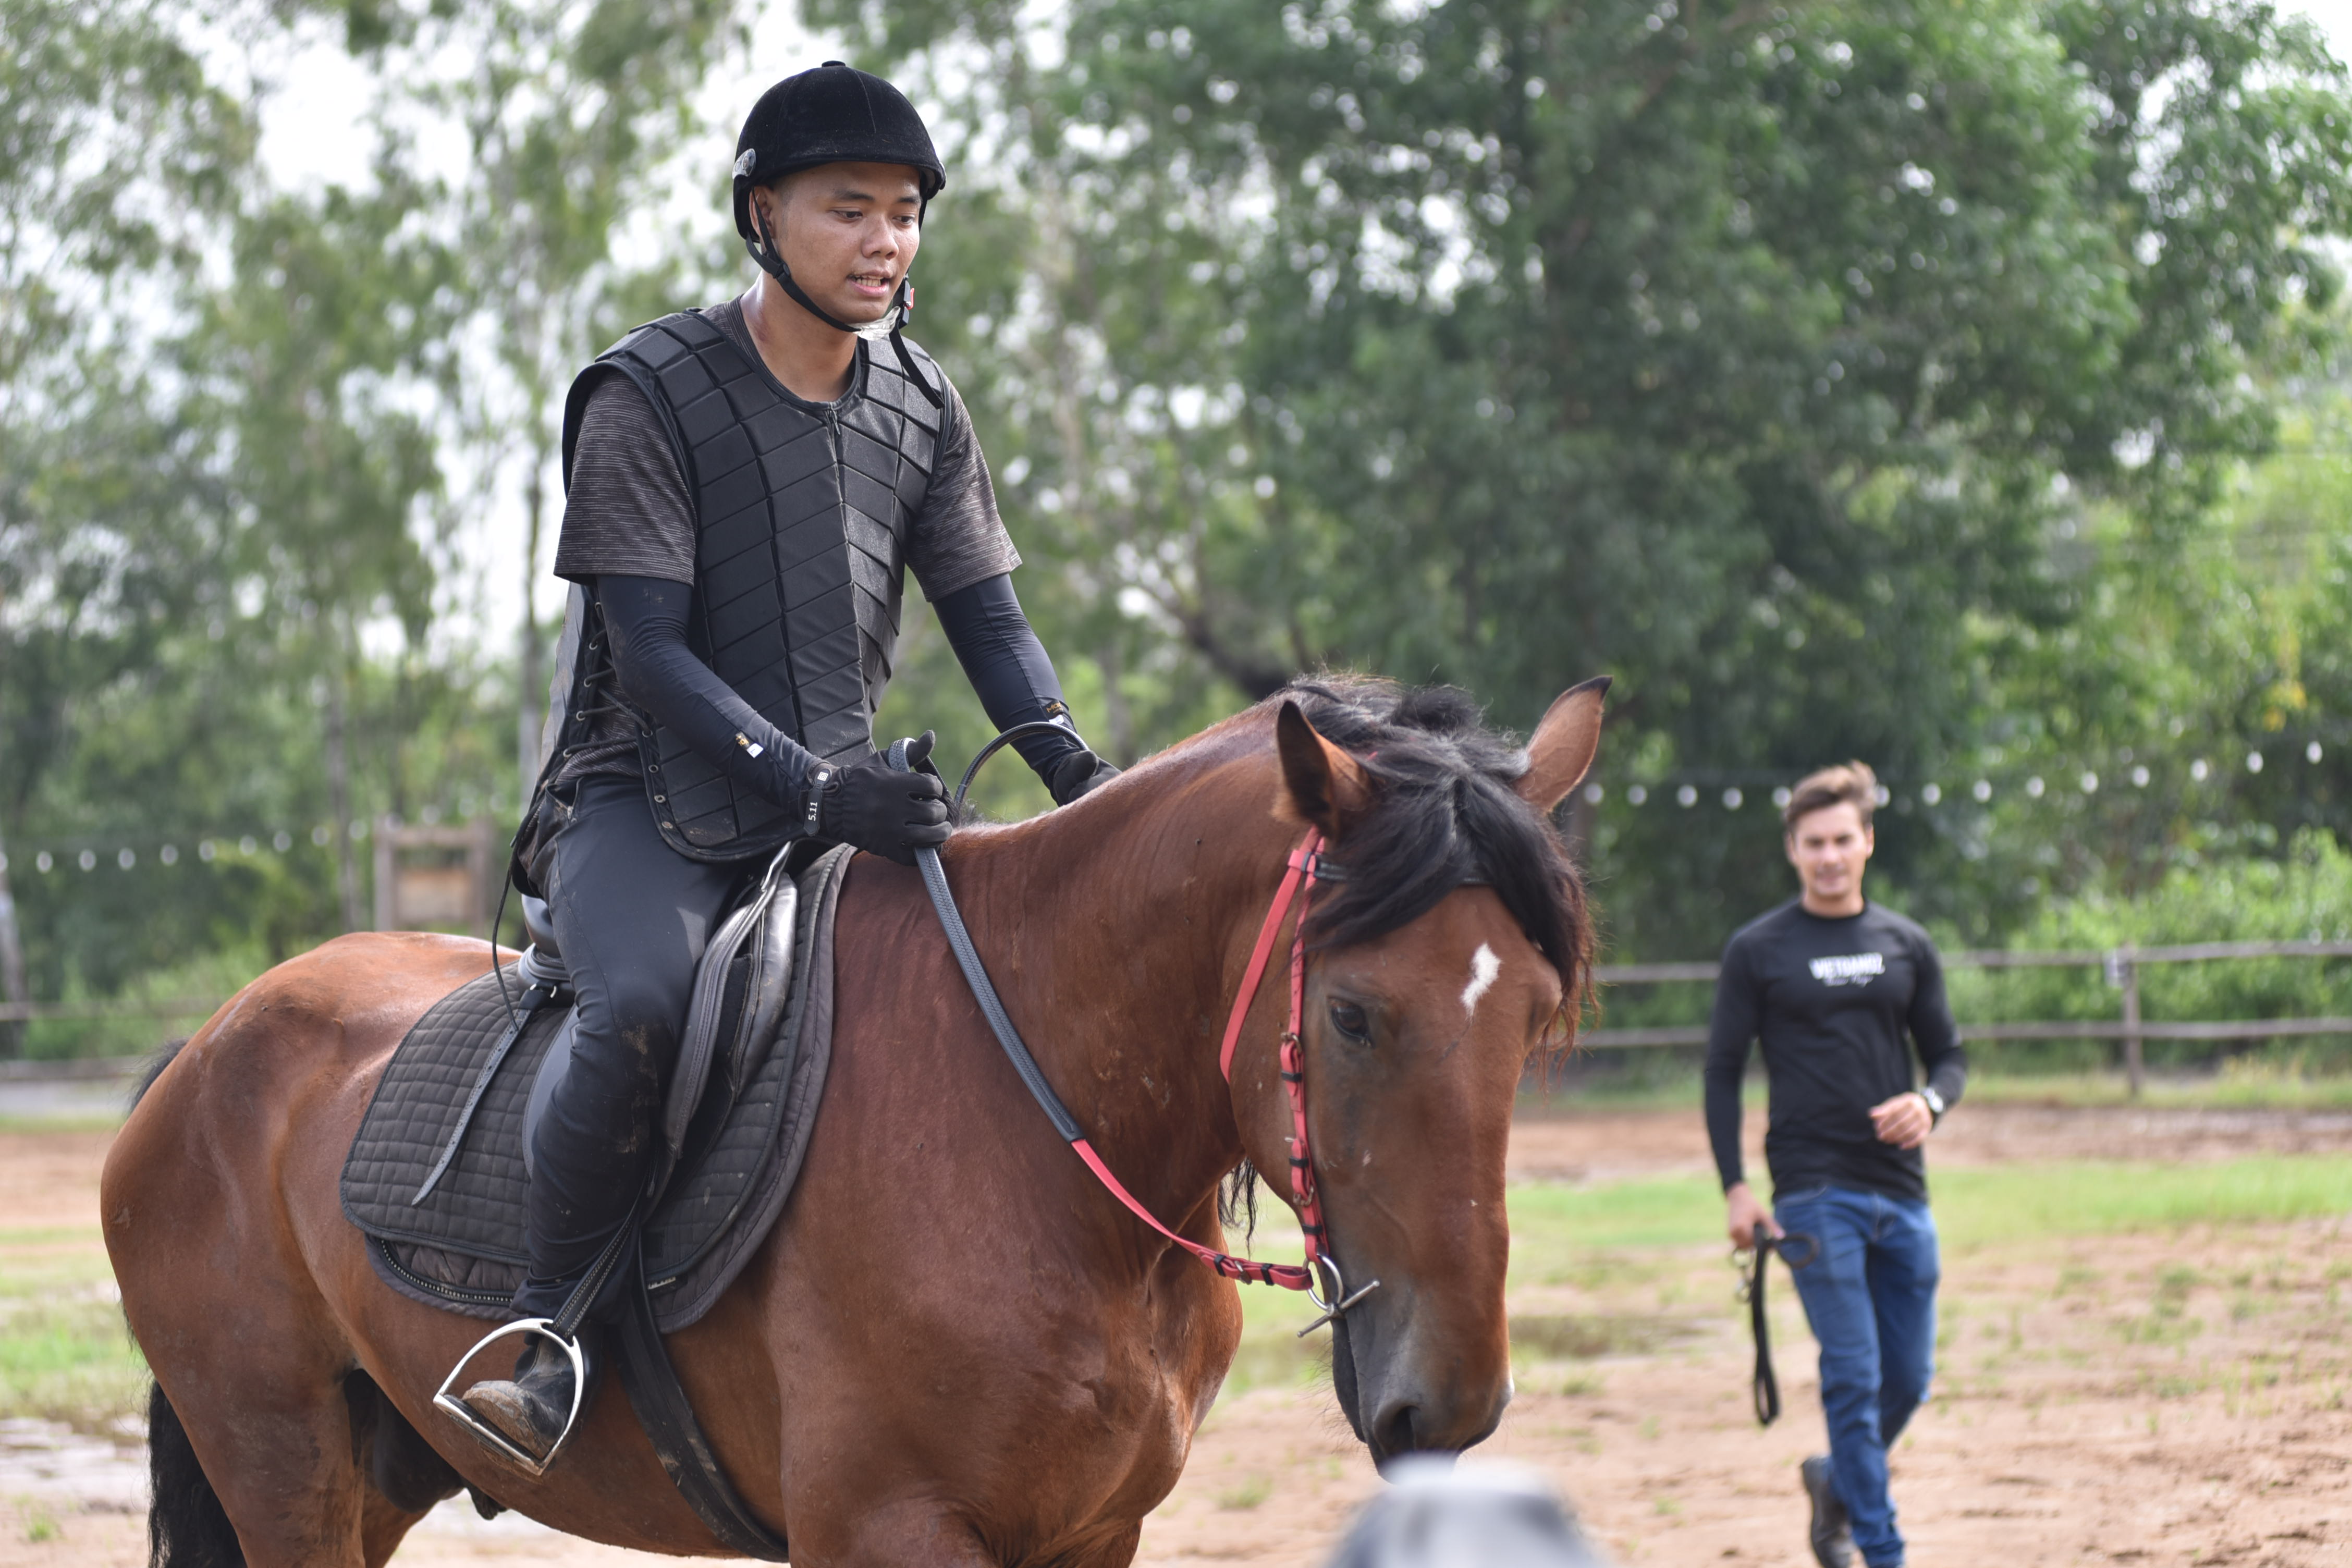 Rider Tran Duy An Khuong learns to ride a horse at Vietgangz Horse Club, Thu Duc City, Ho Chi Minh City. Photo: Ngoc Phuong / Tuoi Tre News